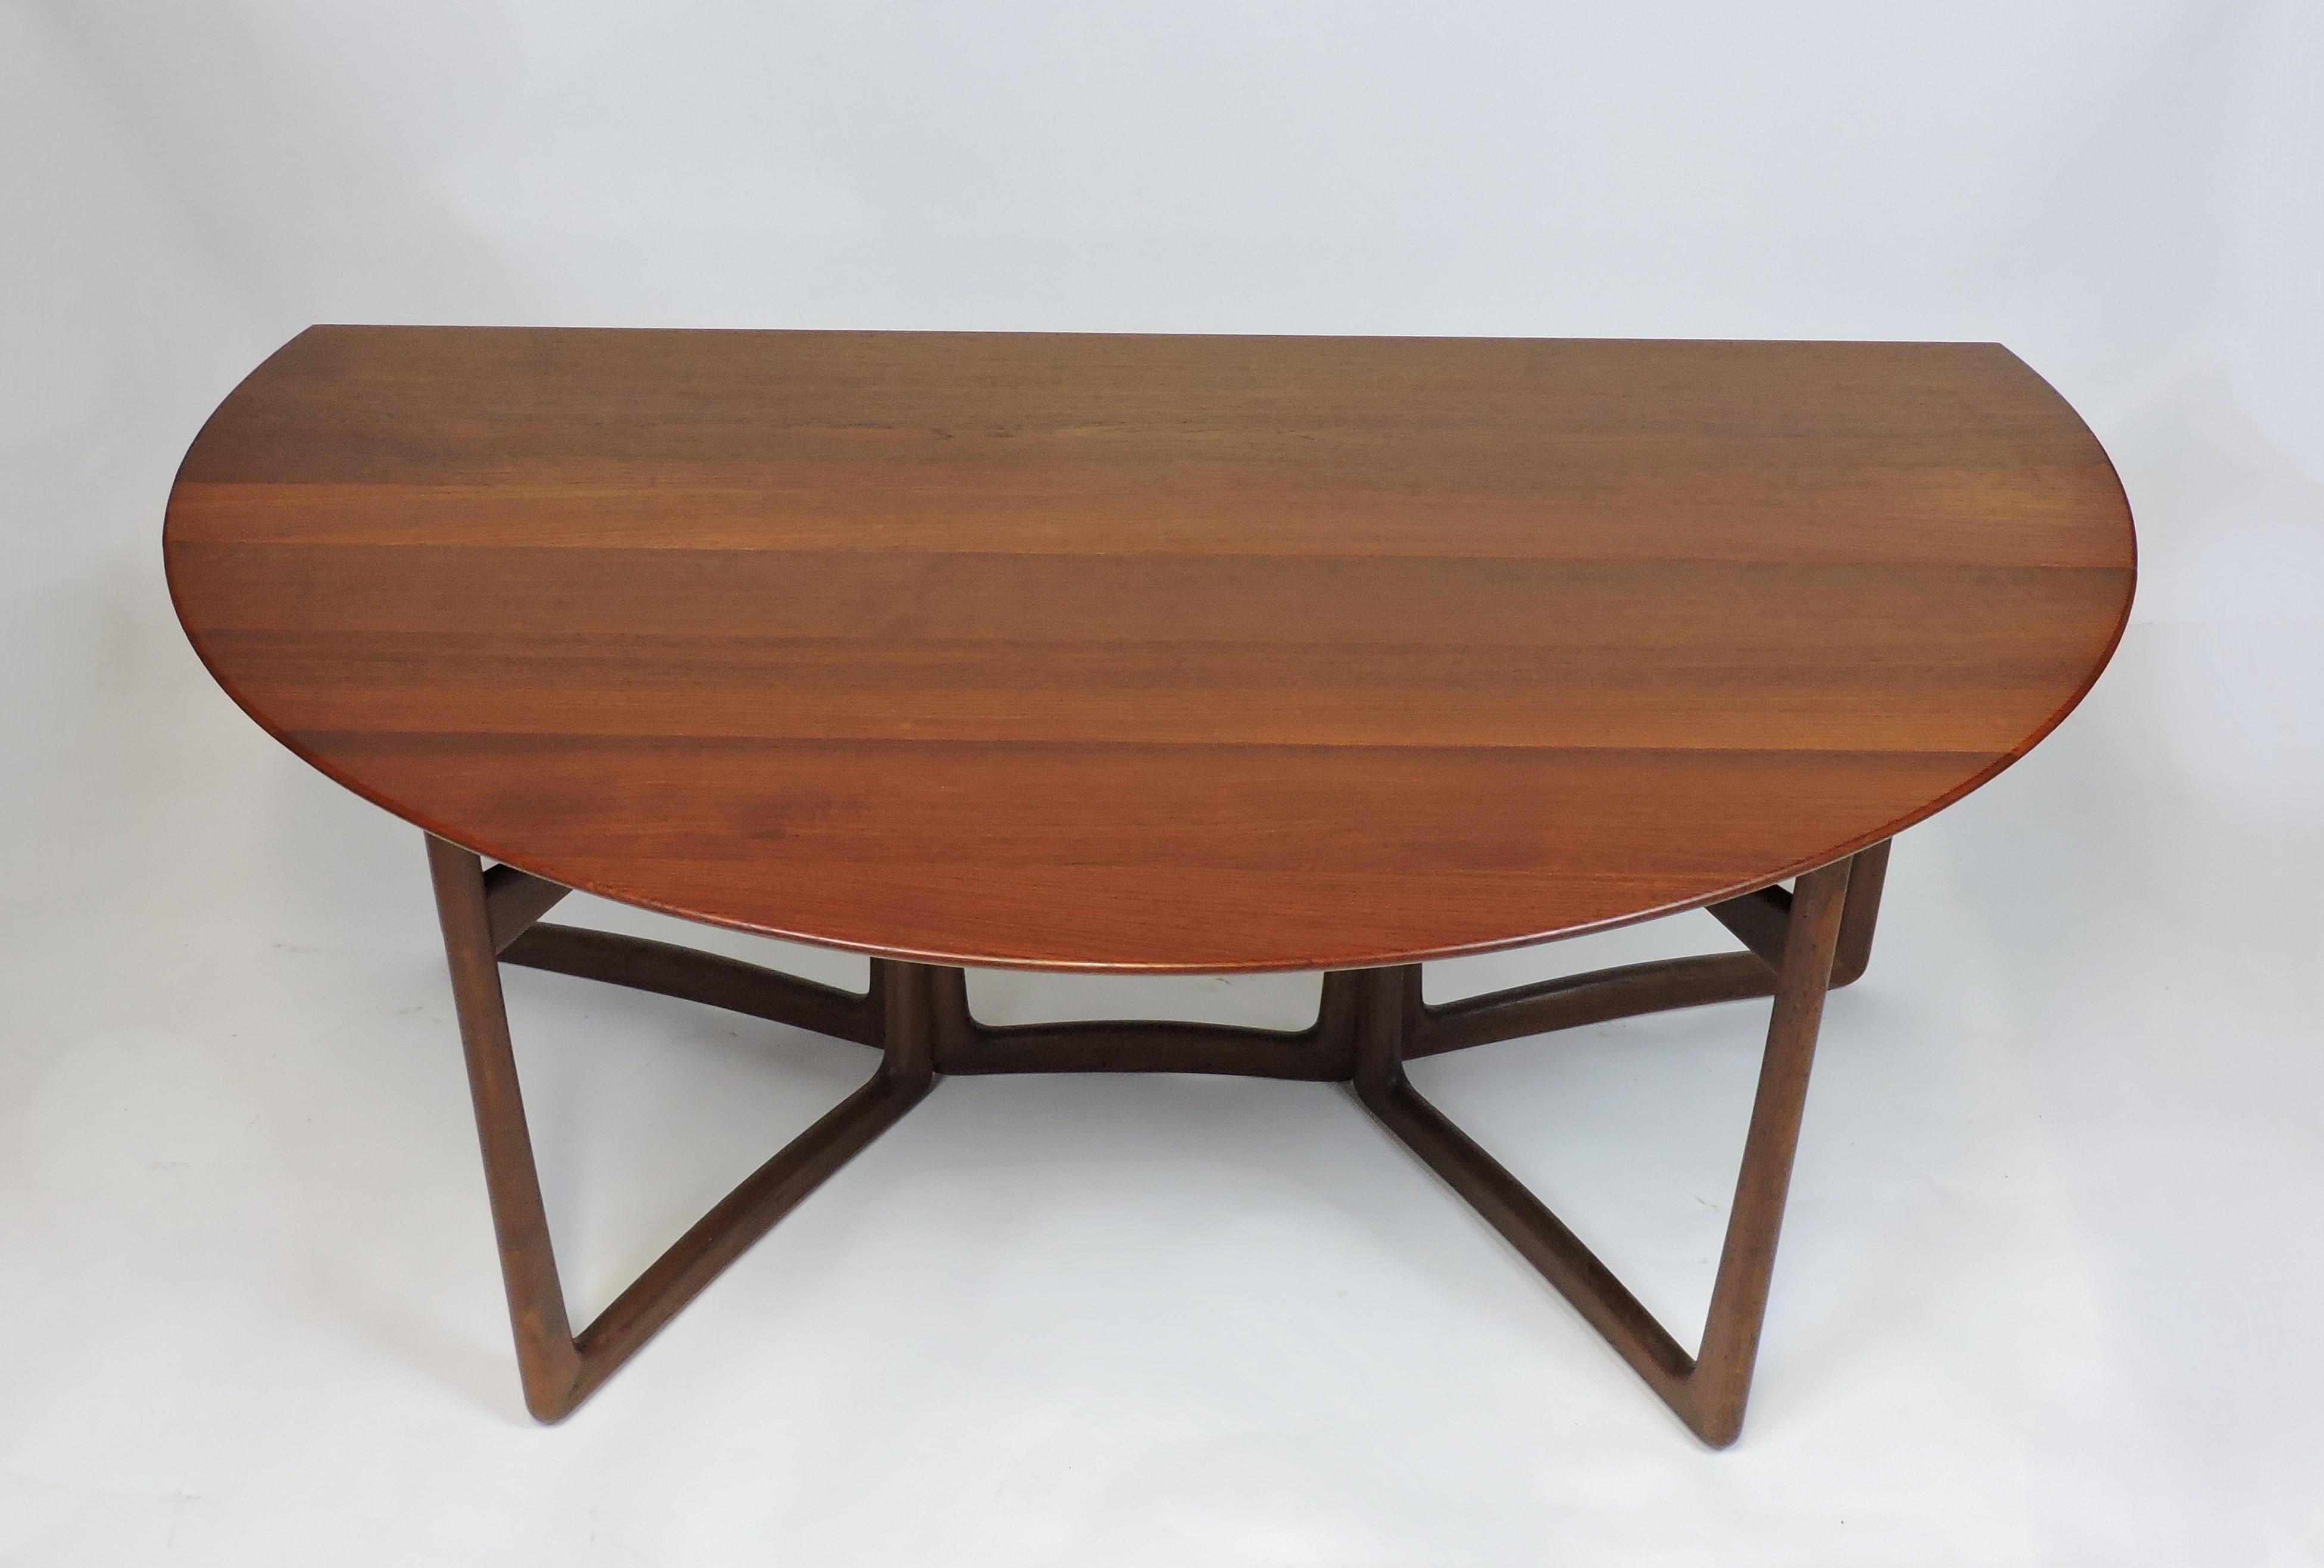 Beautiful and practical drop-leaf dining table designed by Peter Hvidt and Orla Molgaard-Nielsen. This was made in Denmark by France and Son and sold through high-end retailer, John Stuart. The top and the sculpted legs are made of solid teak which